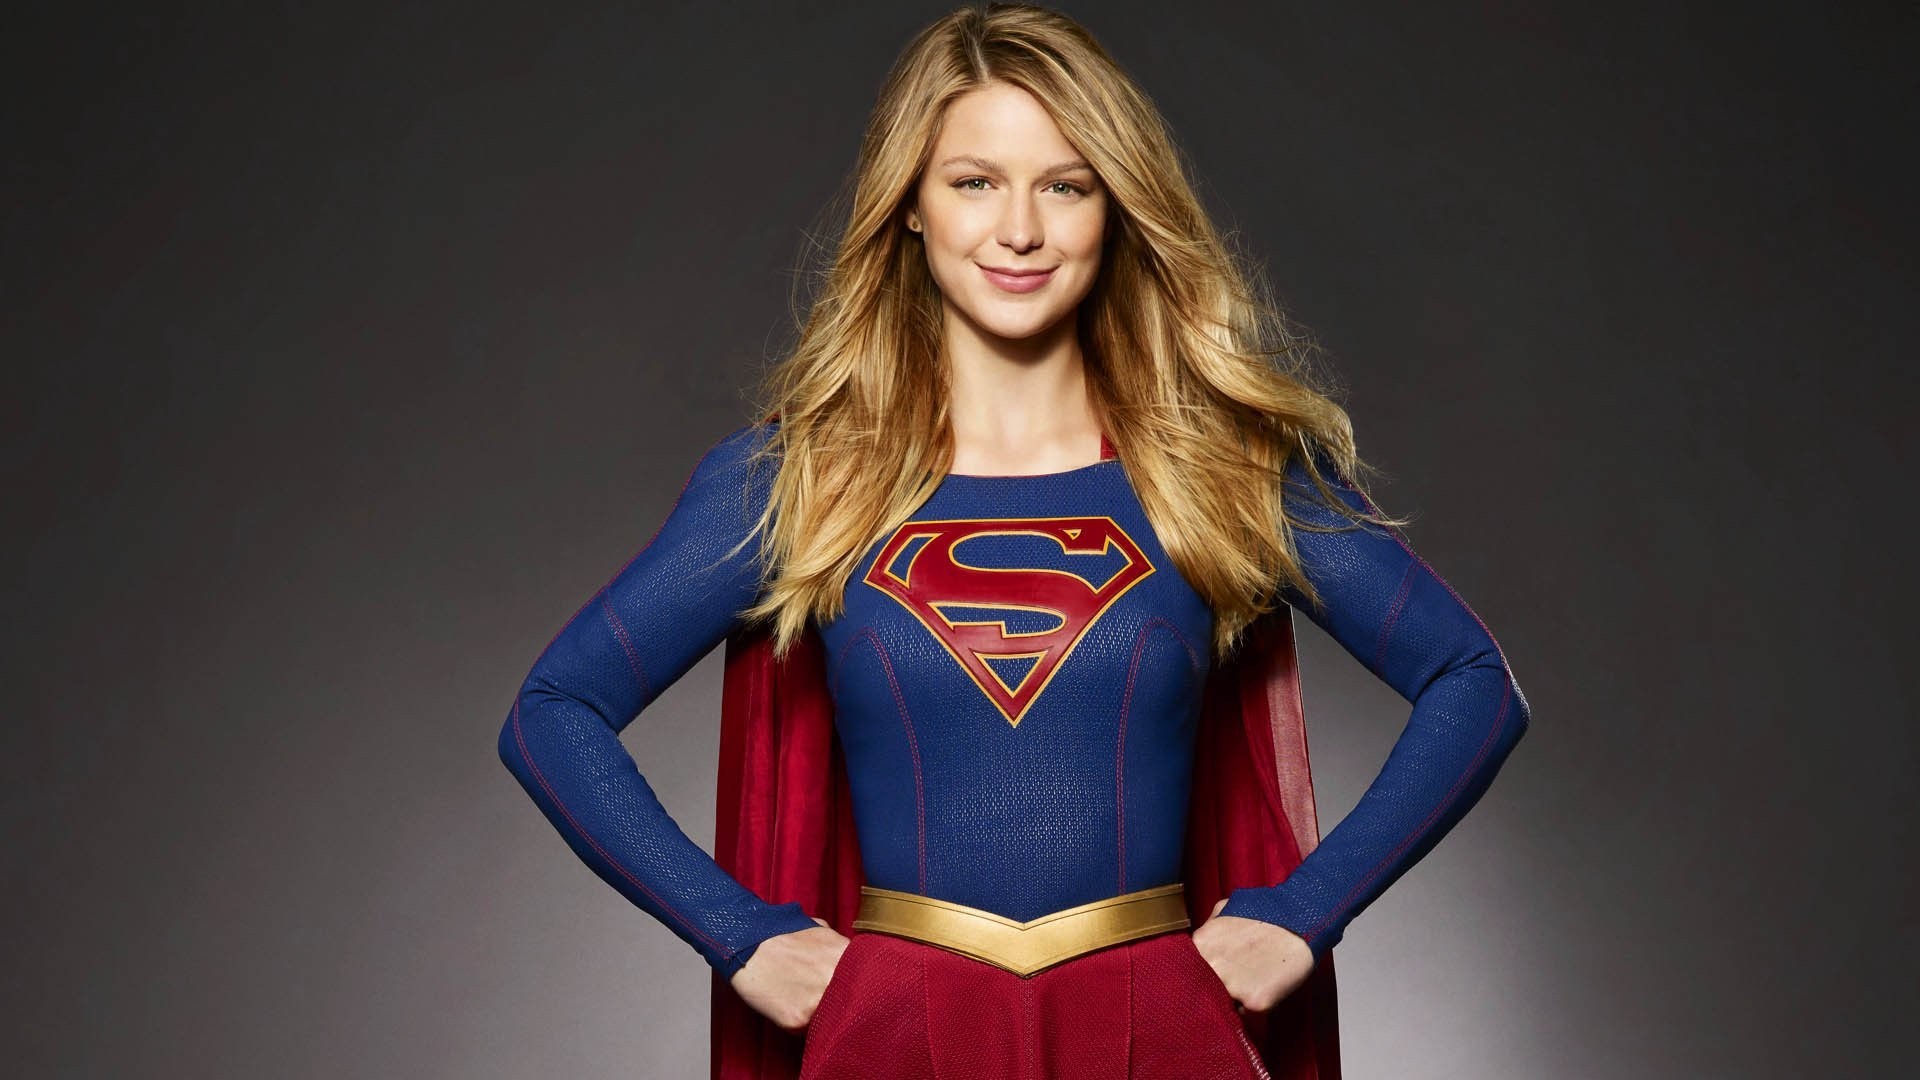 Computer Wallpapers Supergirl With high-resolution 1920X1080 pixel. You can use this wallpaper for your Windows and Mac OS computers as well as your Android and iPhone smartphones